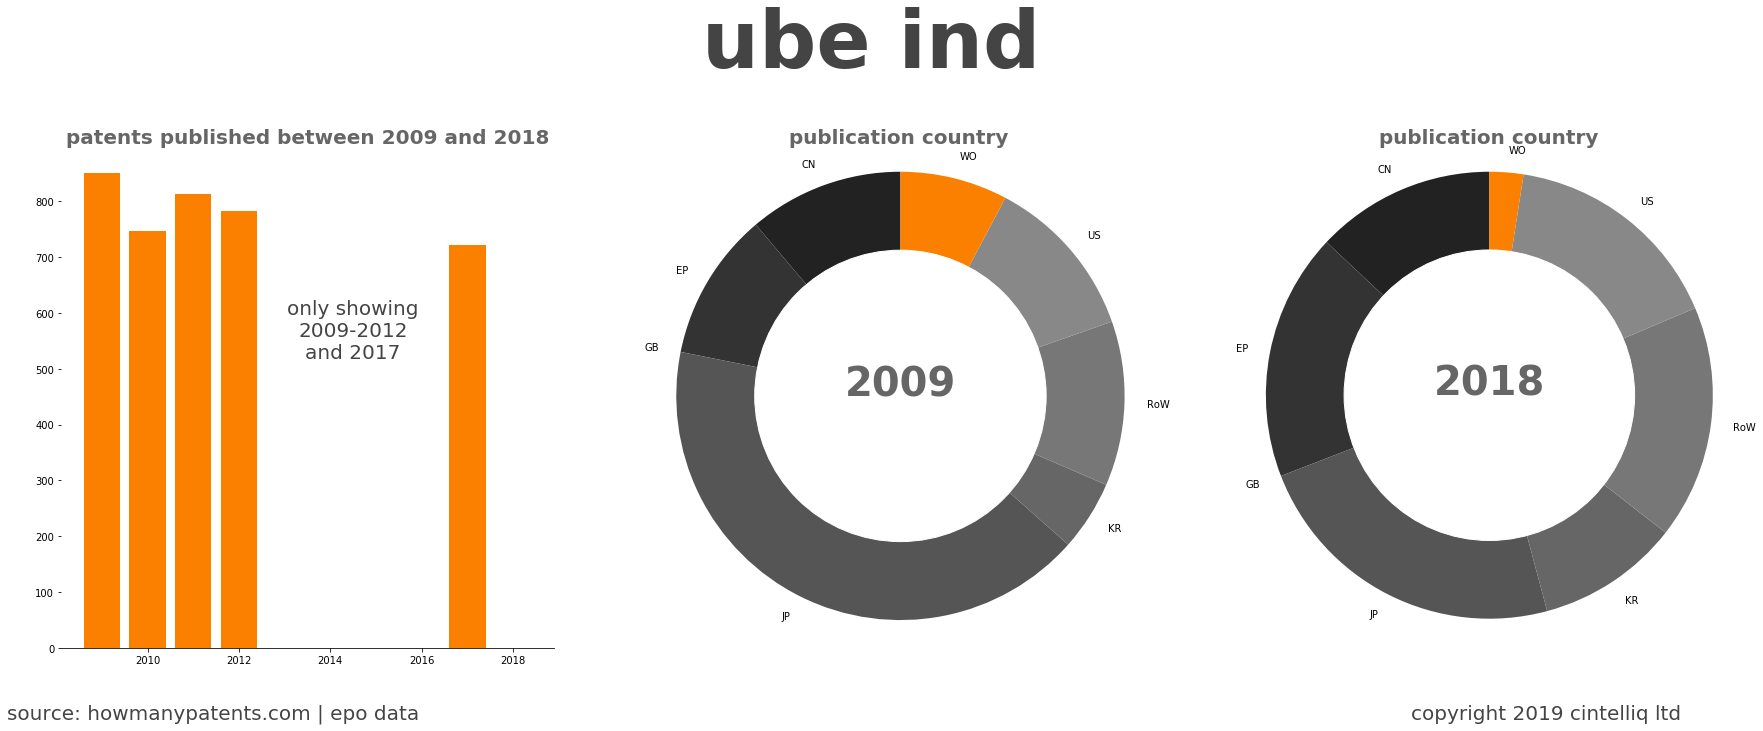 summary of patents for Ube Ind